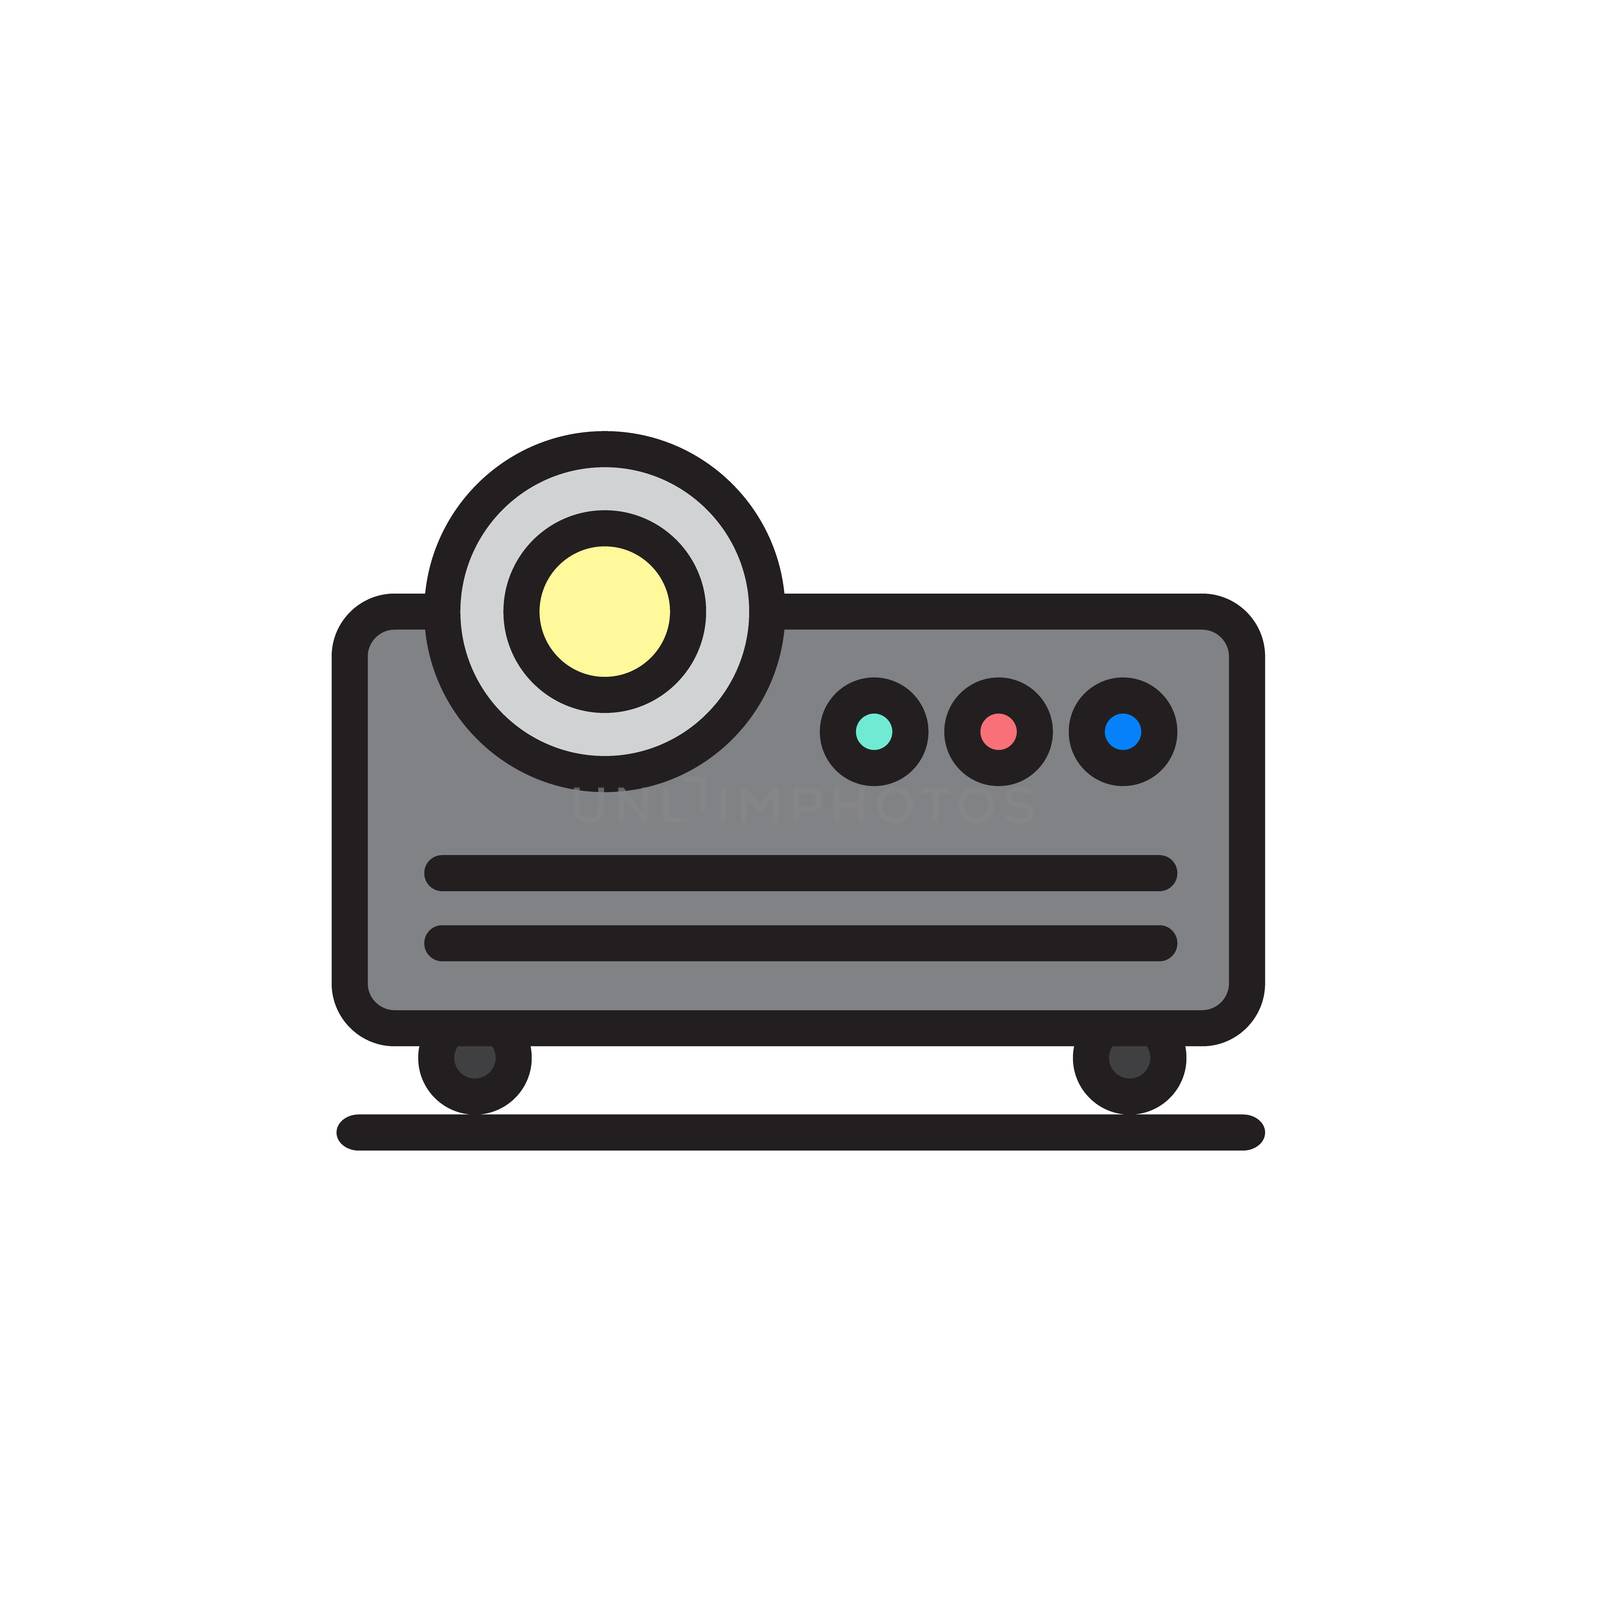 Projector icon for multimedia presentation sessions in modern and cartoon style. Vector